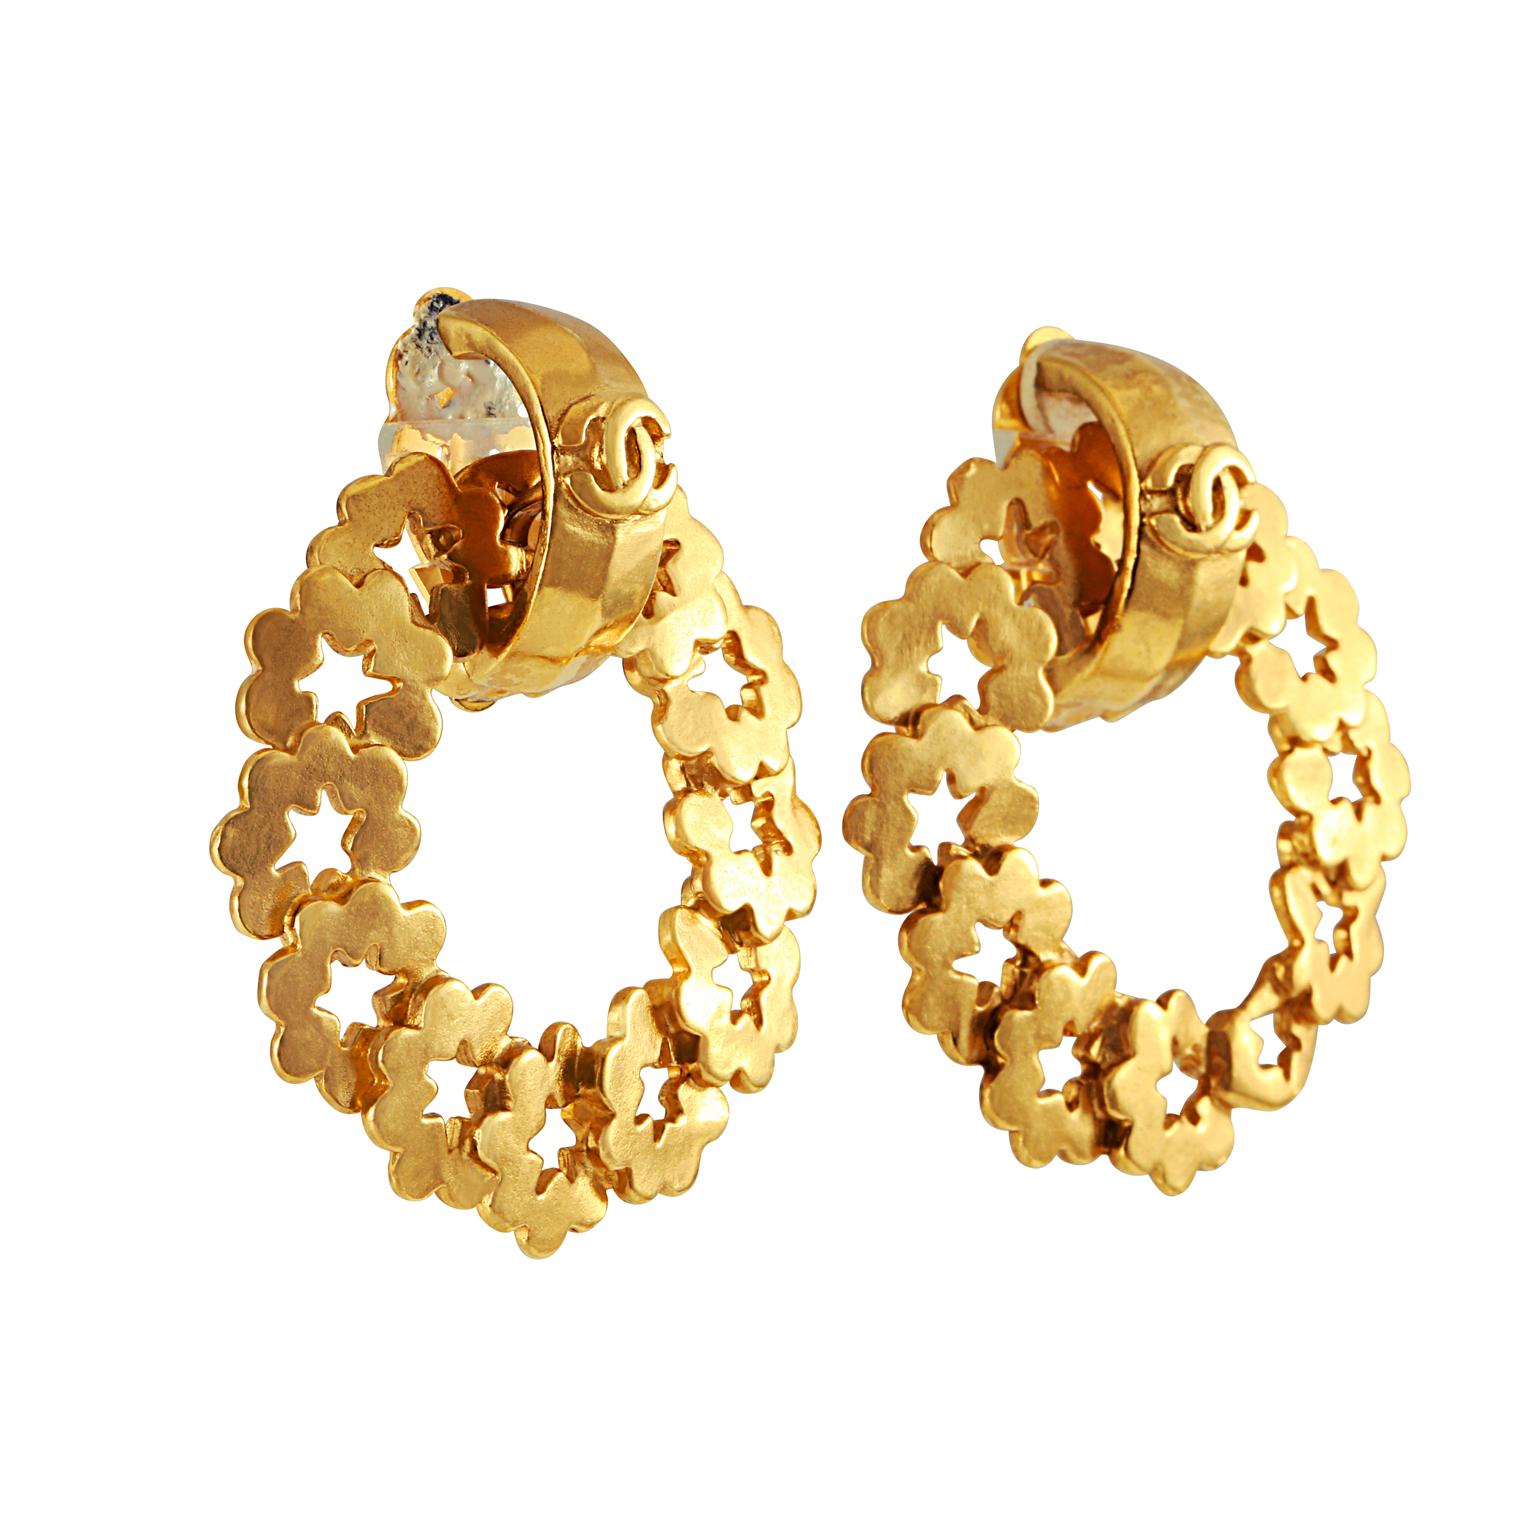 These authentic Chanel Gold Wreath Earrings are in very good vintage condition from the mid 1990’s.   Gold wreath hoops made of individual star cutouts dangle from a CC huggie.  Clip on style. Made in France.  Pouch or box included.

